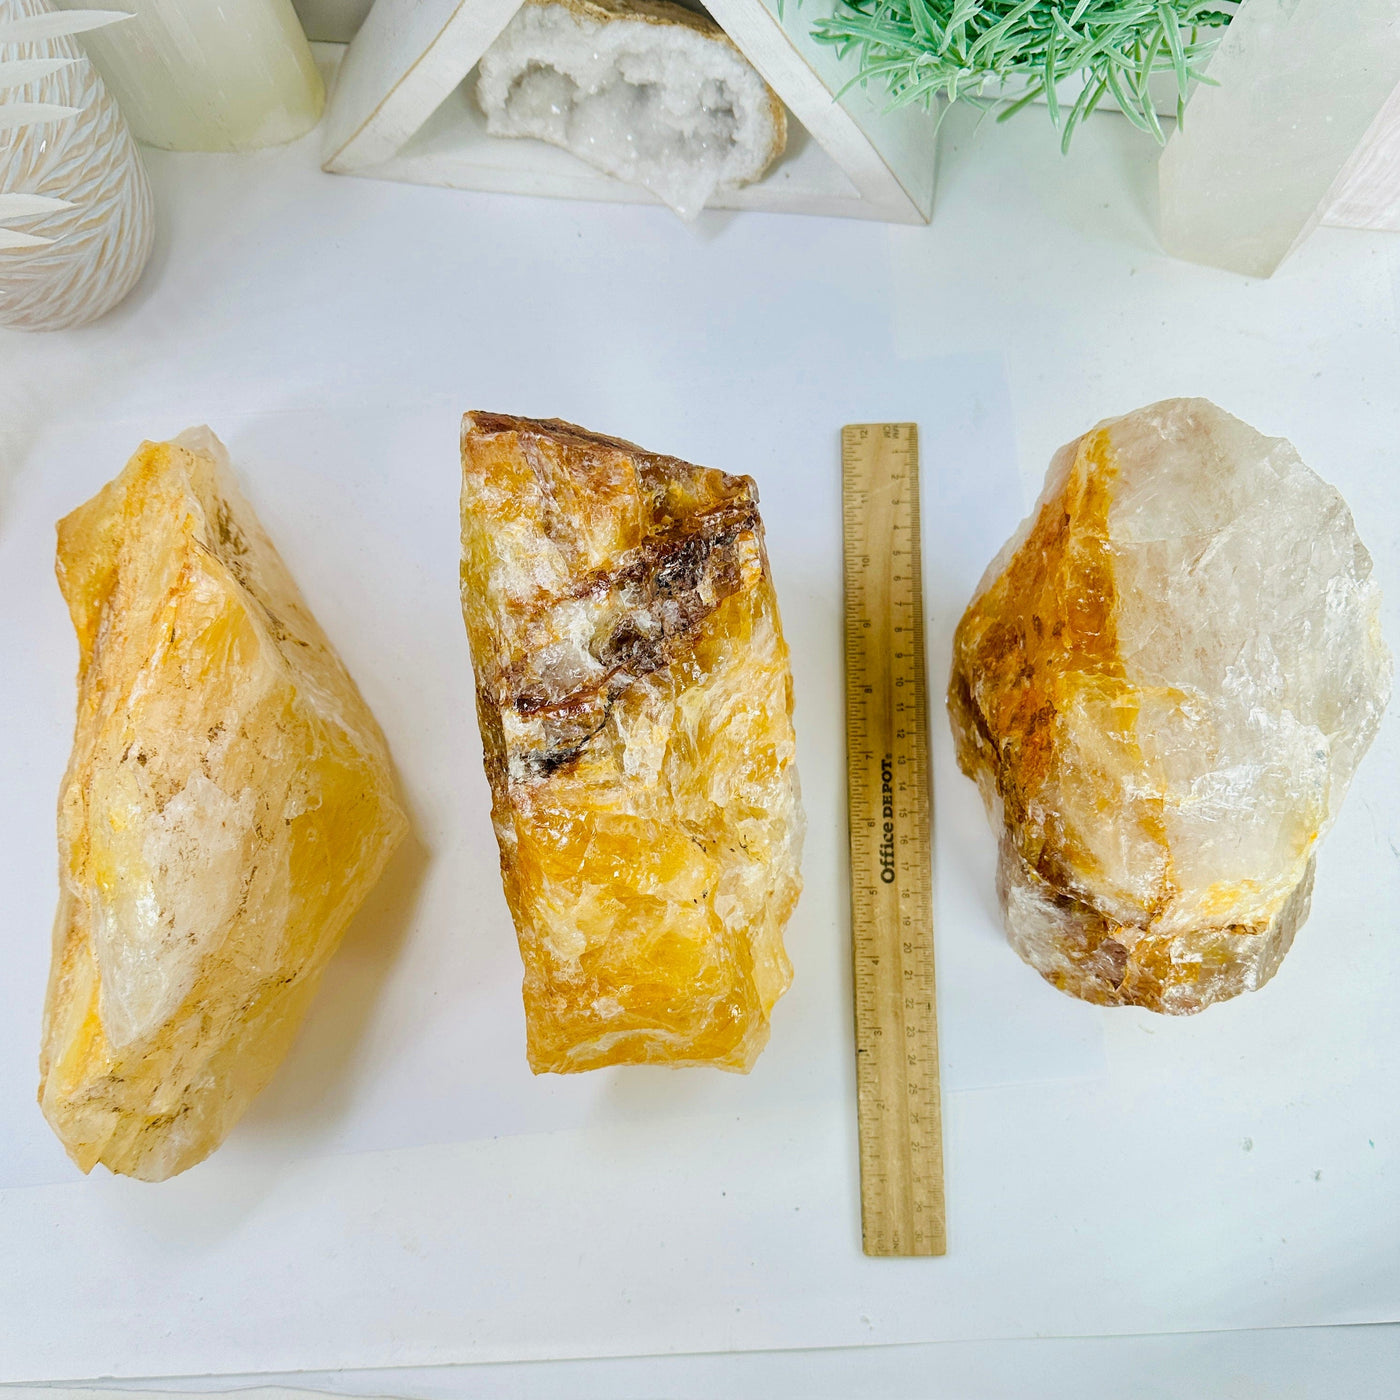 Golden Healer Large Raw Crystal - You Choose all variants with ruler for size reference